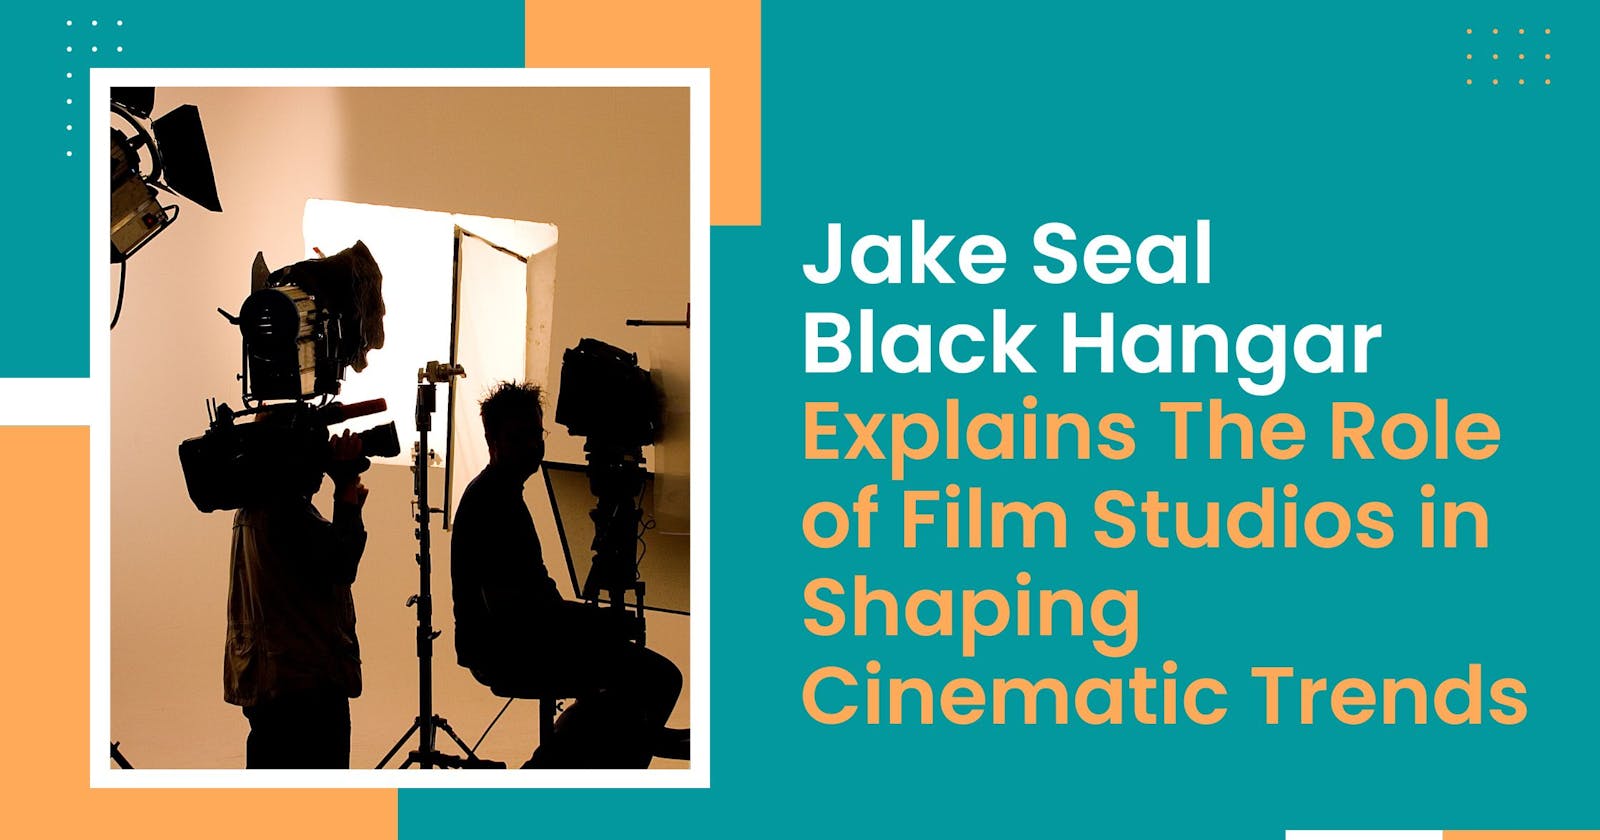 Jake Seal Black Hangar Explains The Role of Film Studios in Shaping Cinematic Trends